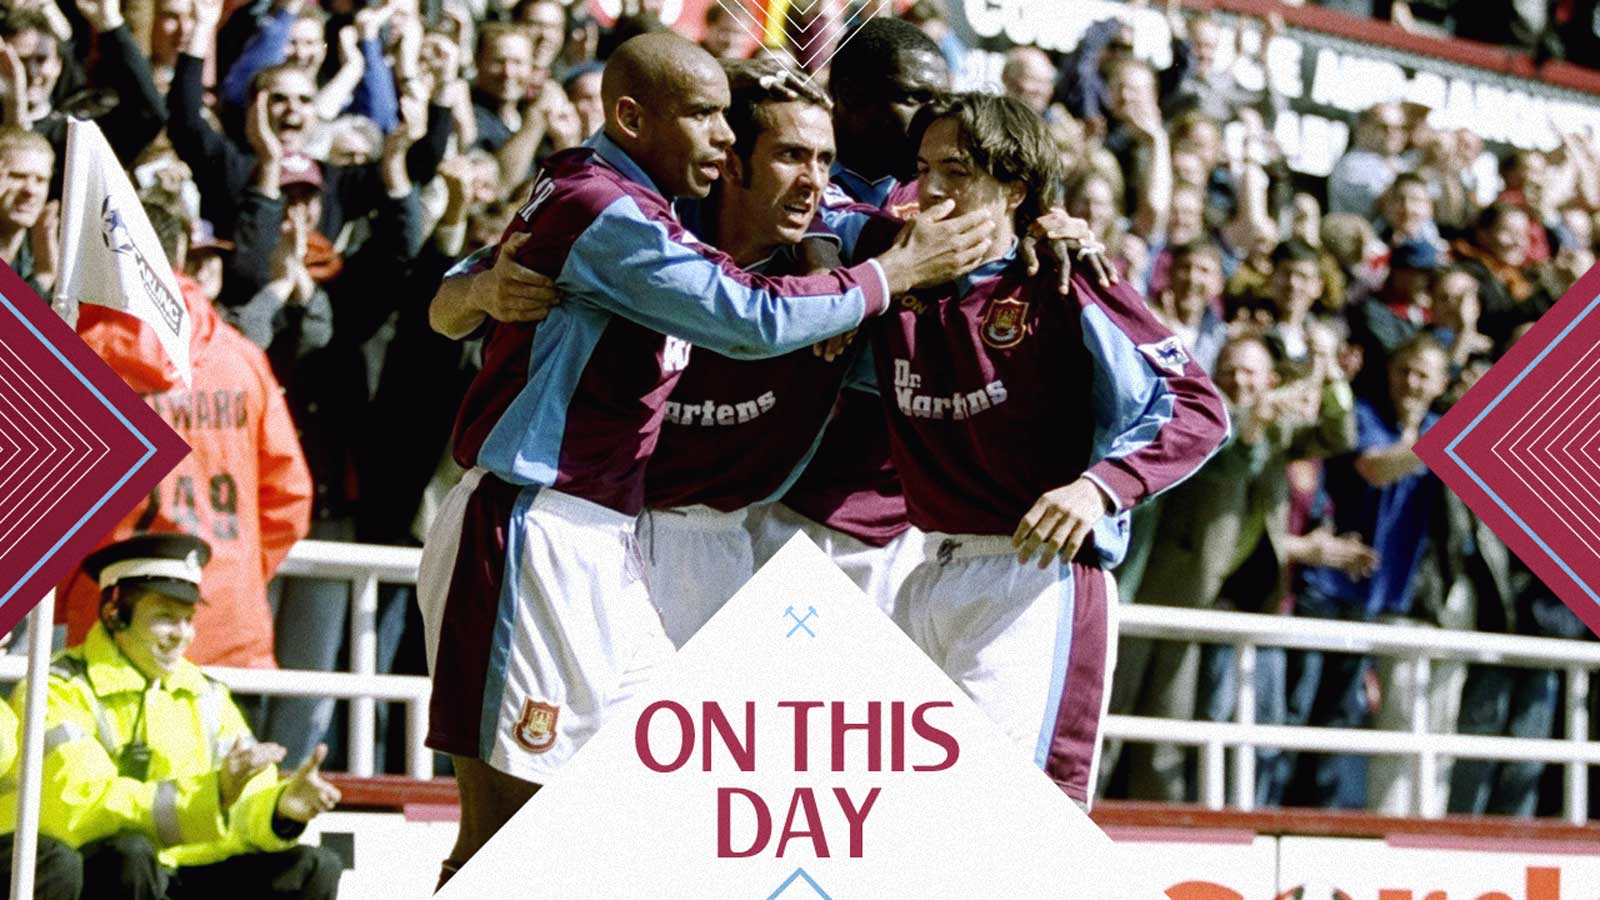 The Hammers celebrate against Derby in April 1999